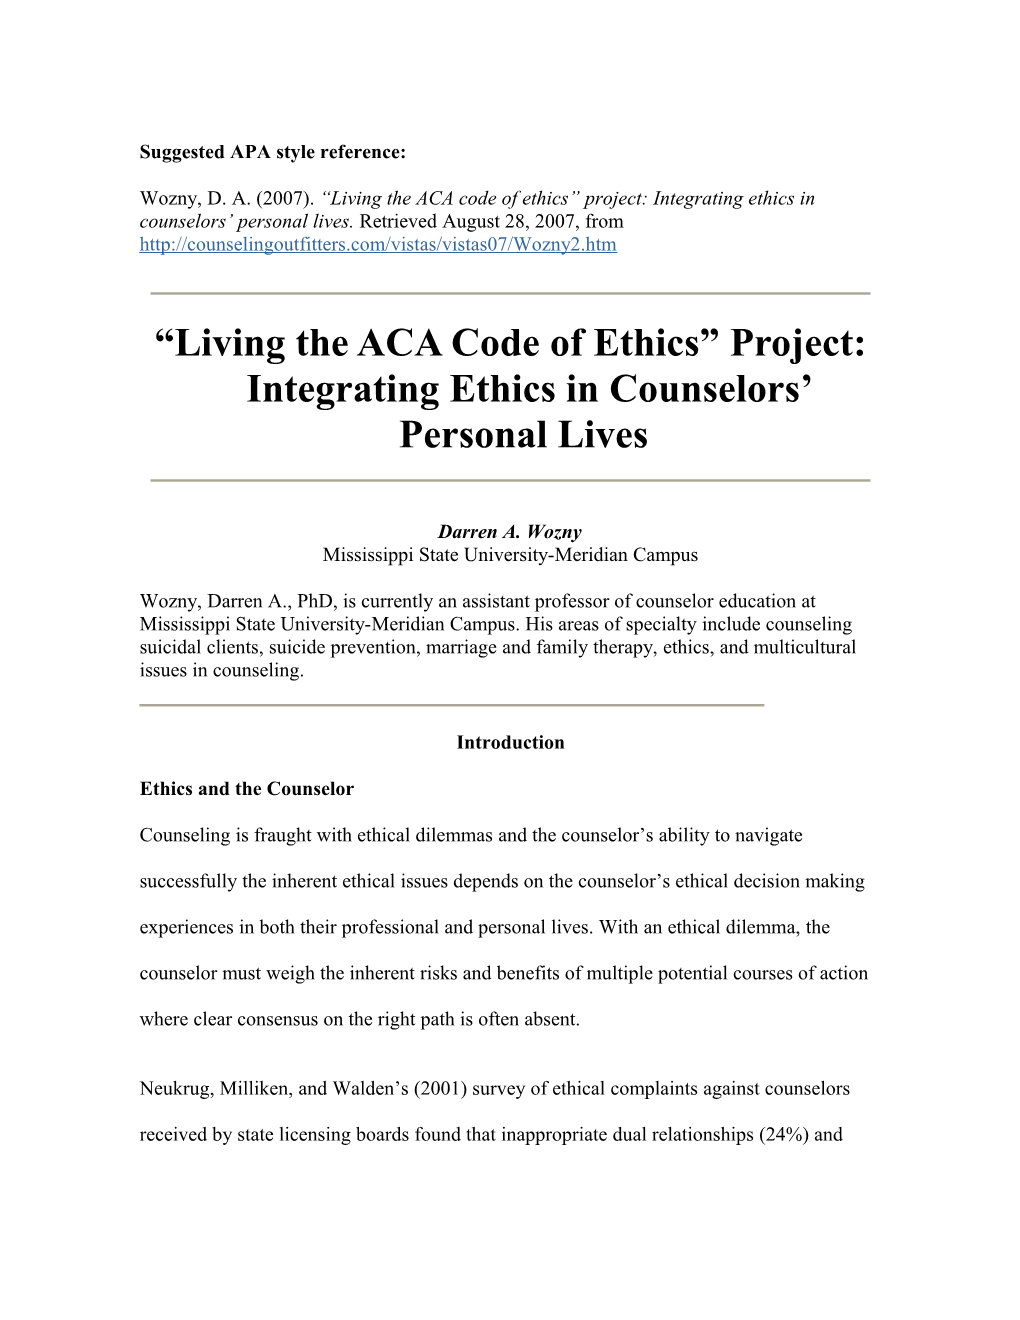 Living the ACA Code of Ethics Project: Integrating Ethics in Counselors Personal Lives